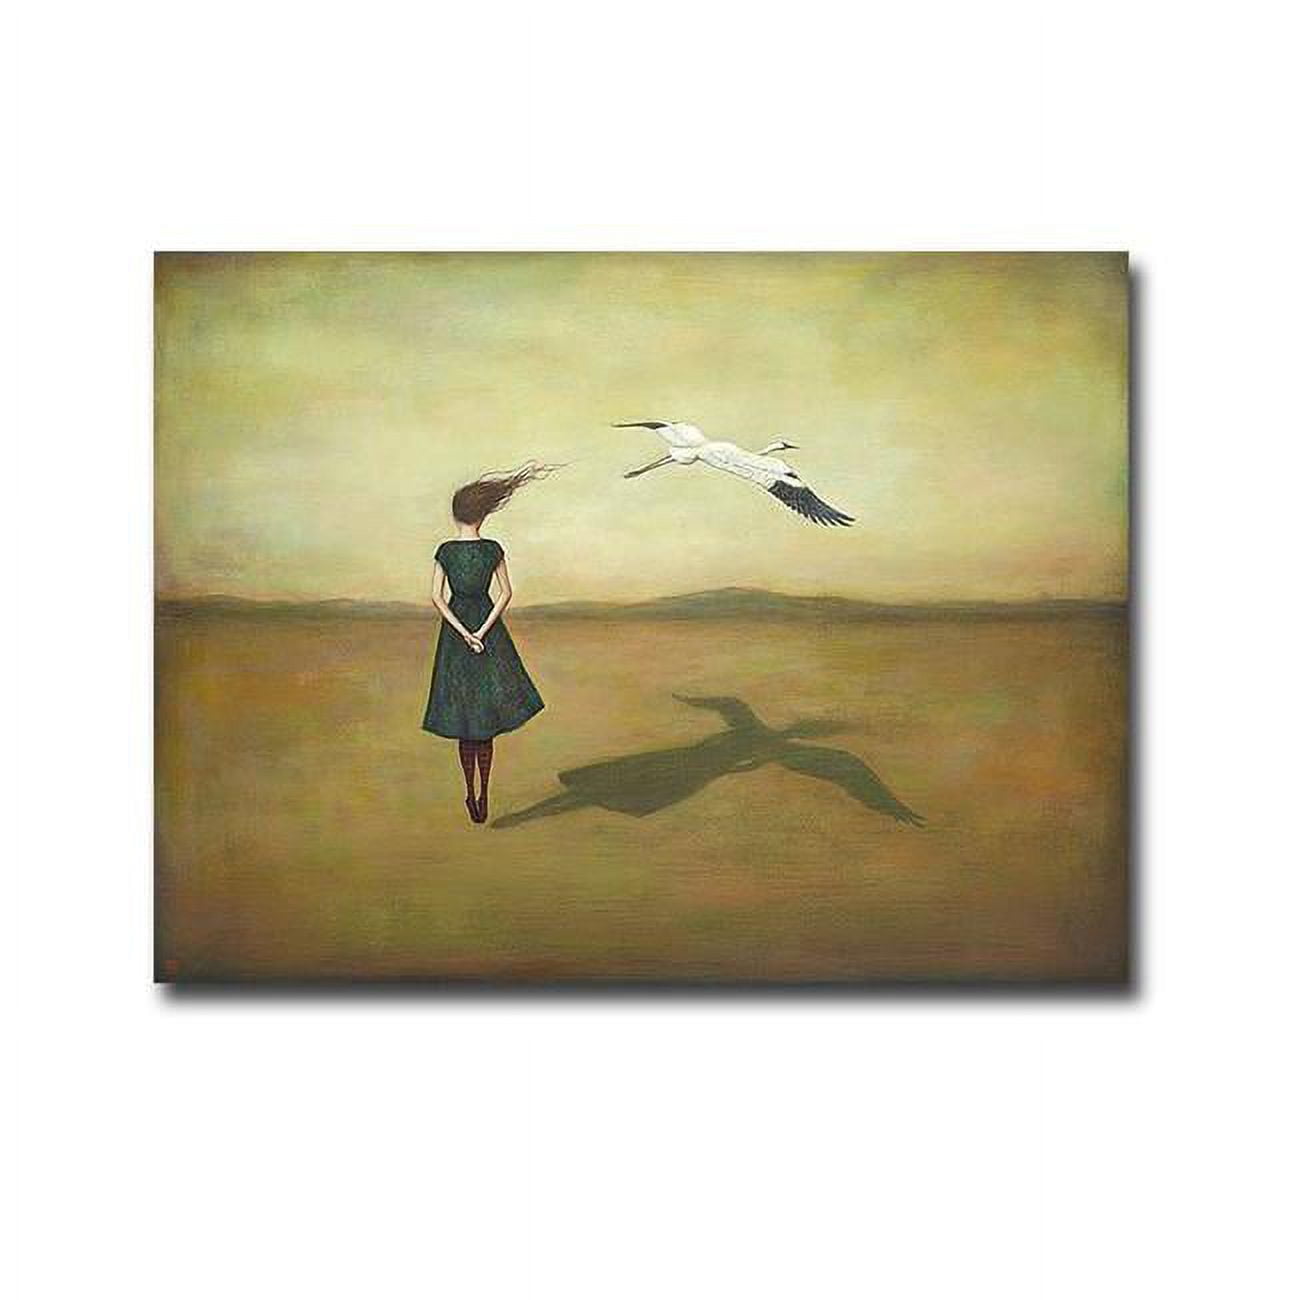 Eggscapism By Duy Huynh Premium Oversize Gallery-wrapped Canvas Giclee Art - 30 X 40 X 1.5 In.